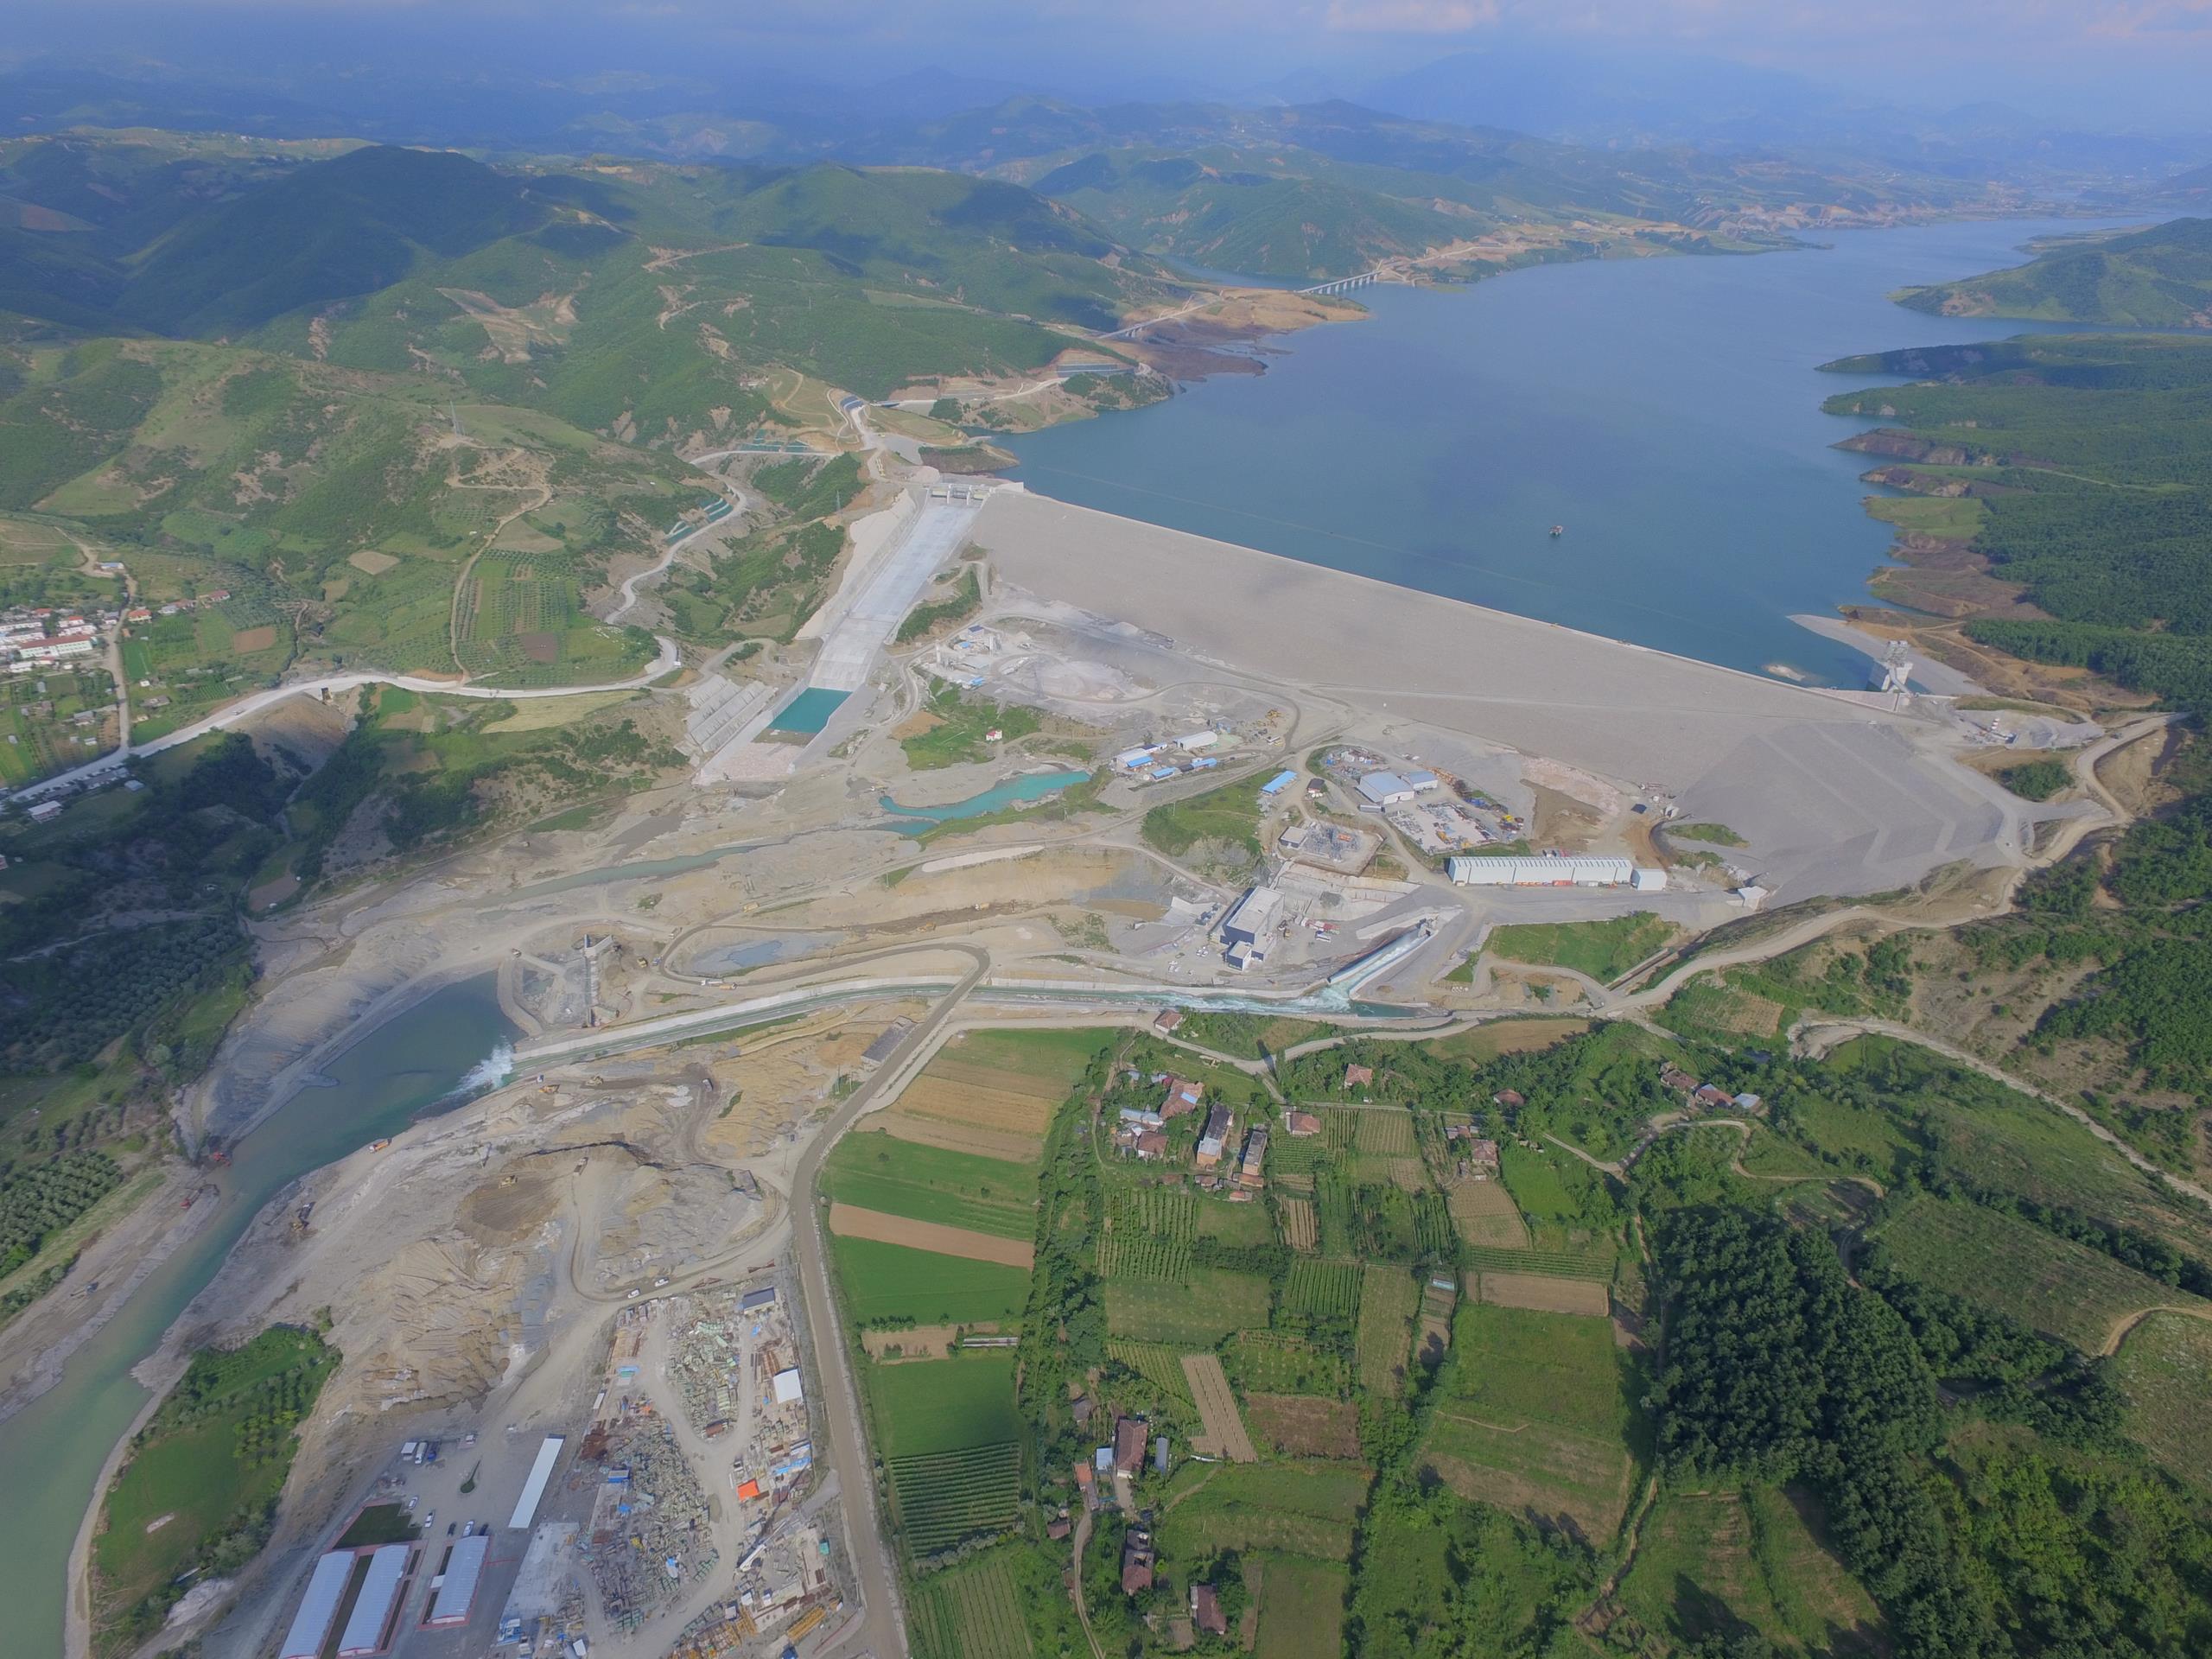 Aerial view of the Banja hydropower plant on the Devoll River in southern Albania.